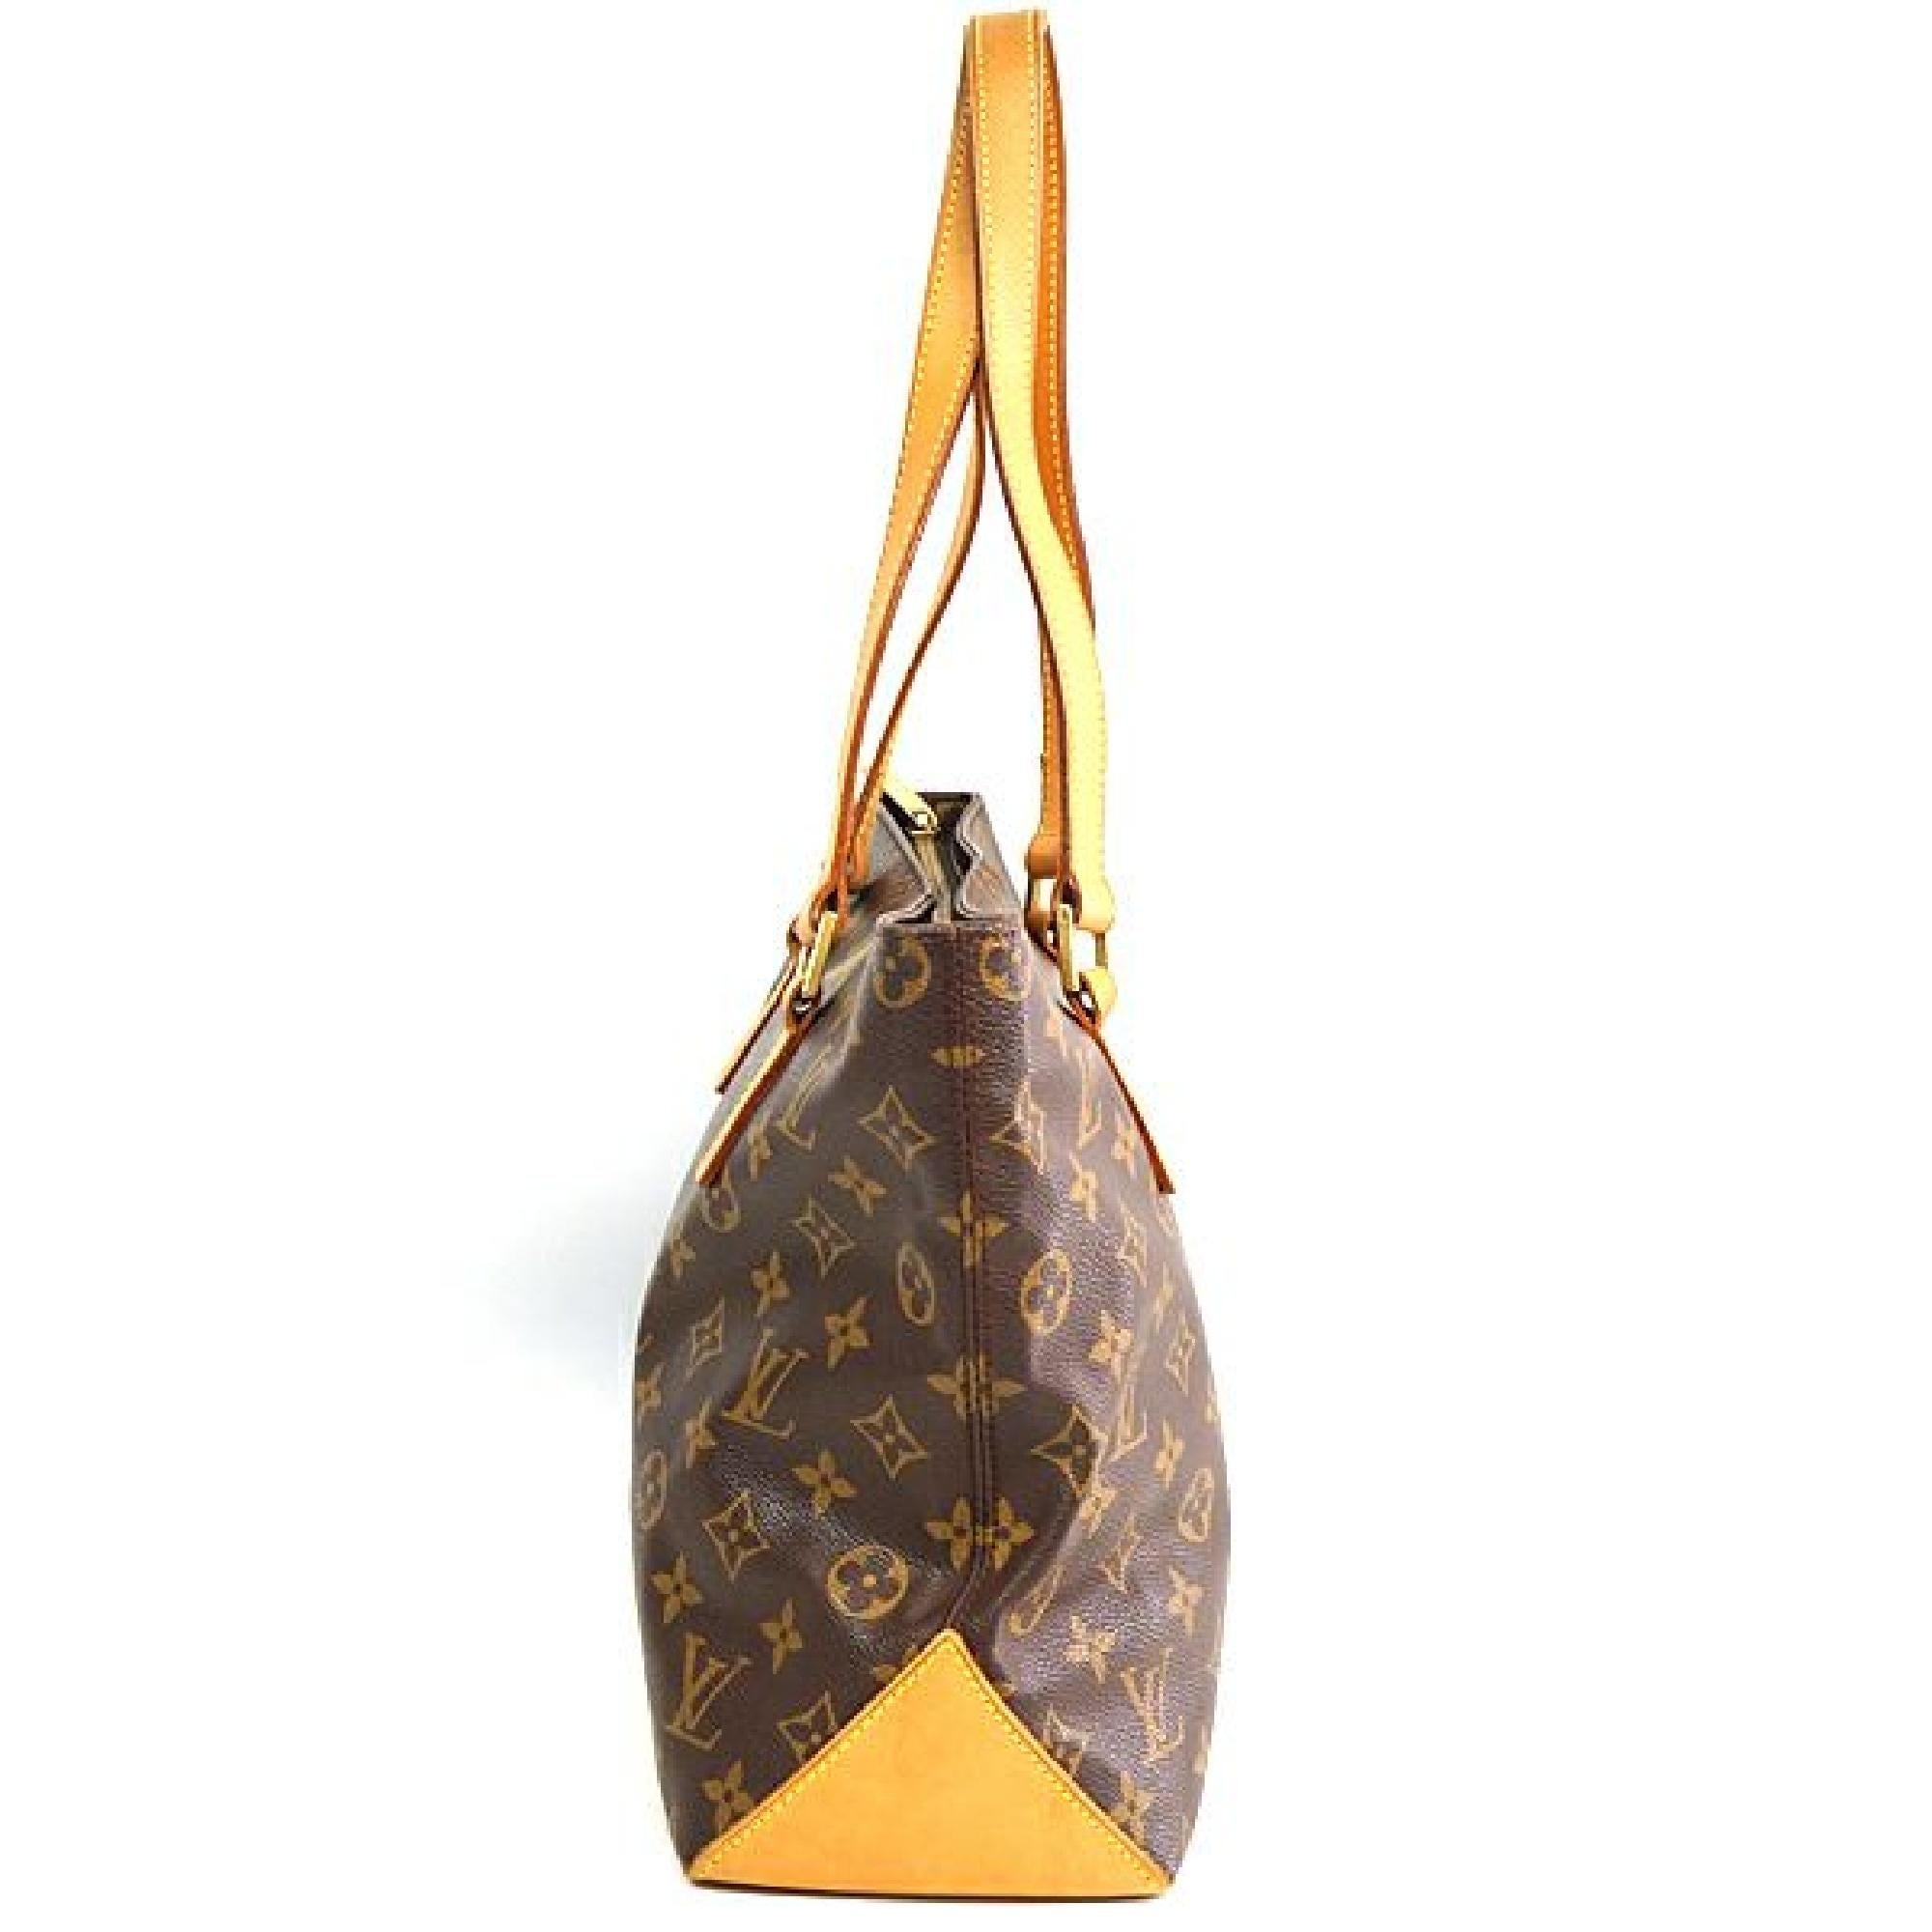 An authentic LOUIS VUITTON Cabas Piano Womens tote bag M51148 The outside material is Monogram canvas. The pattern is Cabas Piano. This item is Contemporary. The year of manufacture would be 2001.
Rank
AB signs of wear (Small)
Used goods in good